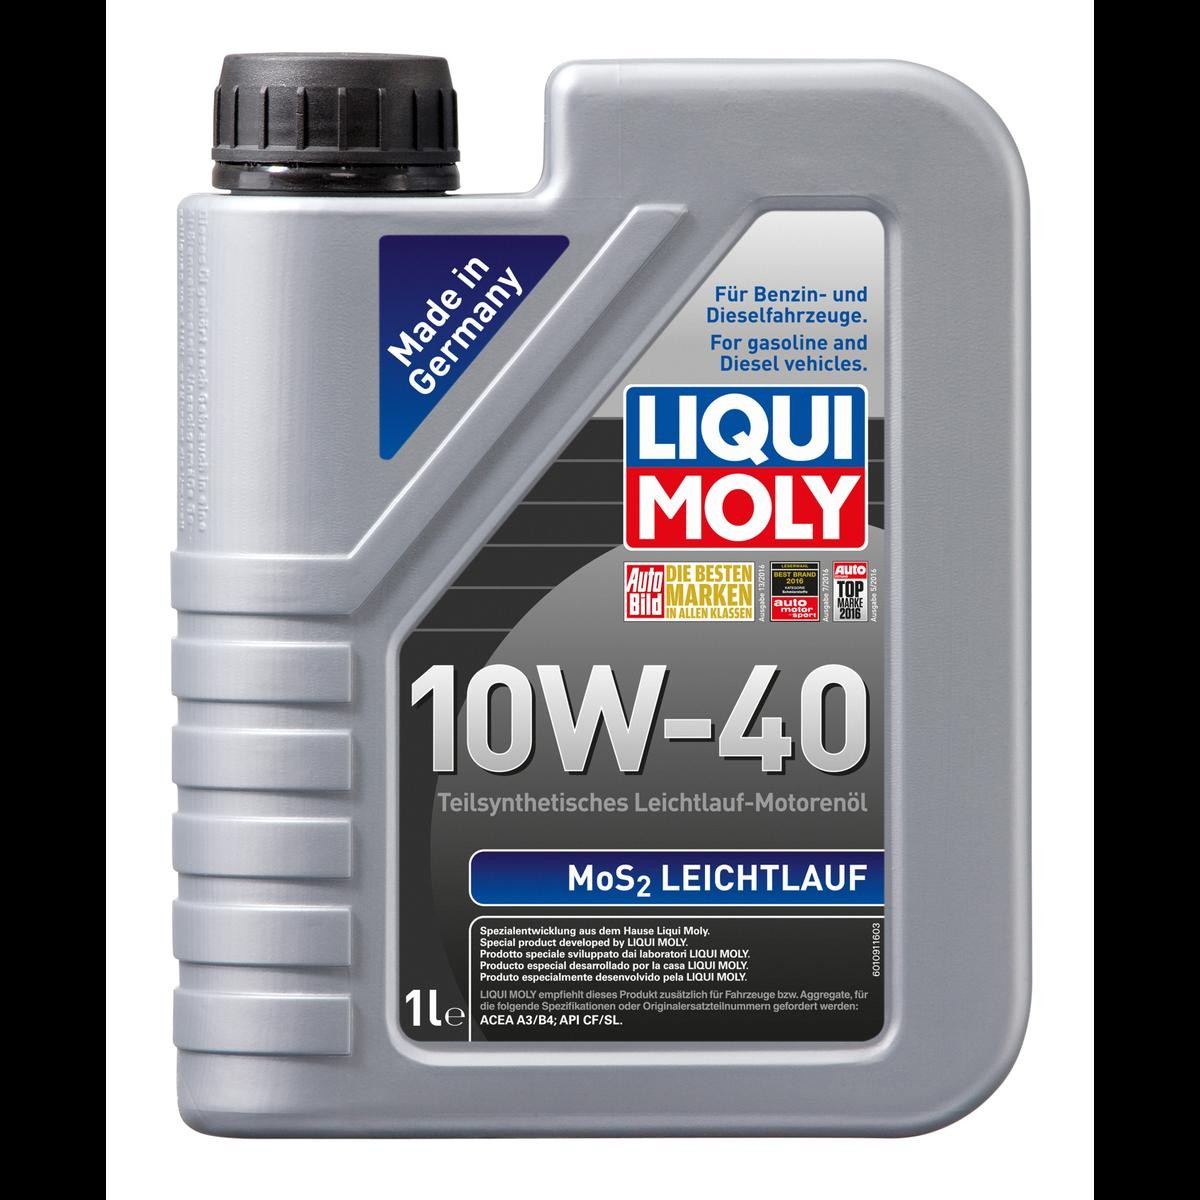 LIQUI MOLY 1091 Engine oil cheap in online store